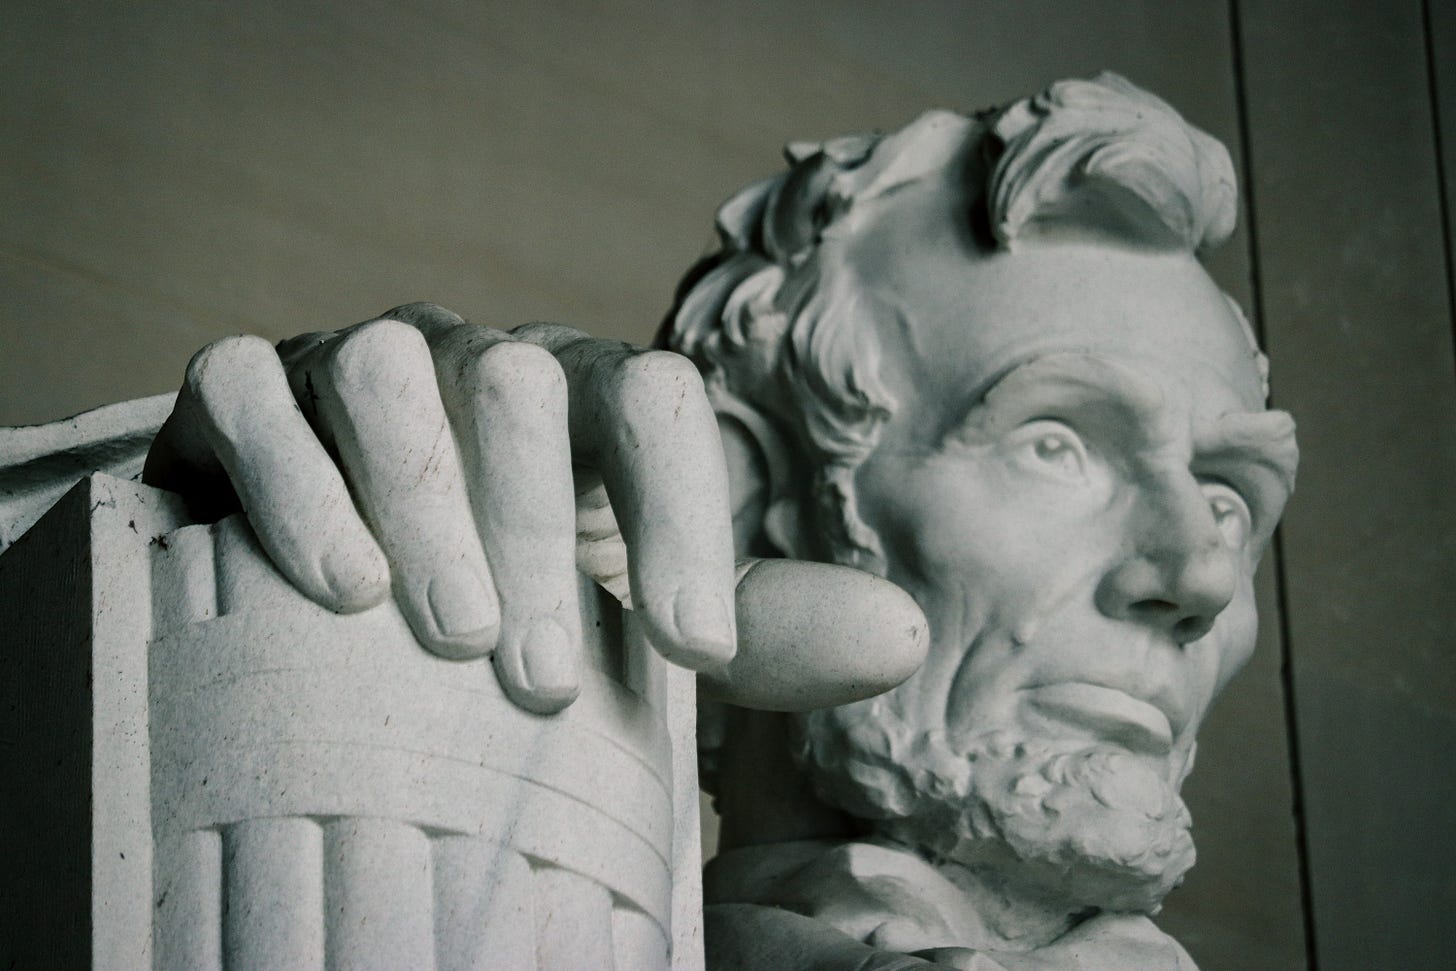 Upclose photo of the face of the Abraham Lincoln statue at the Lincoln Memorial